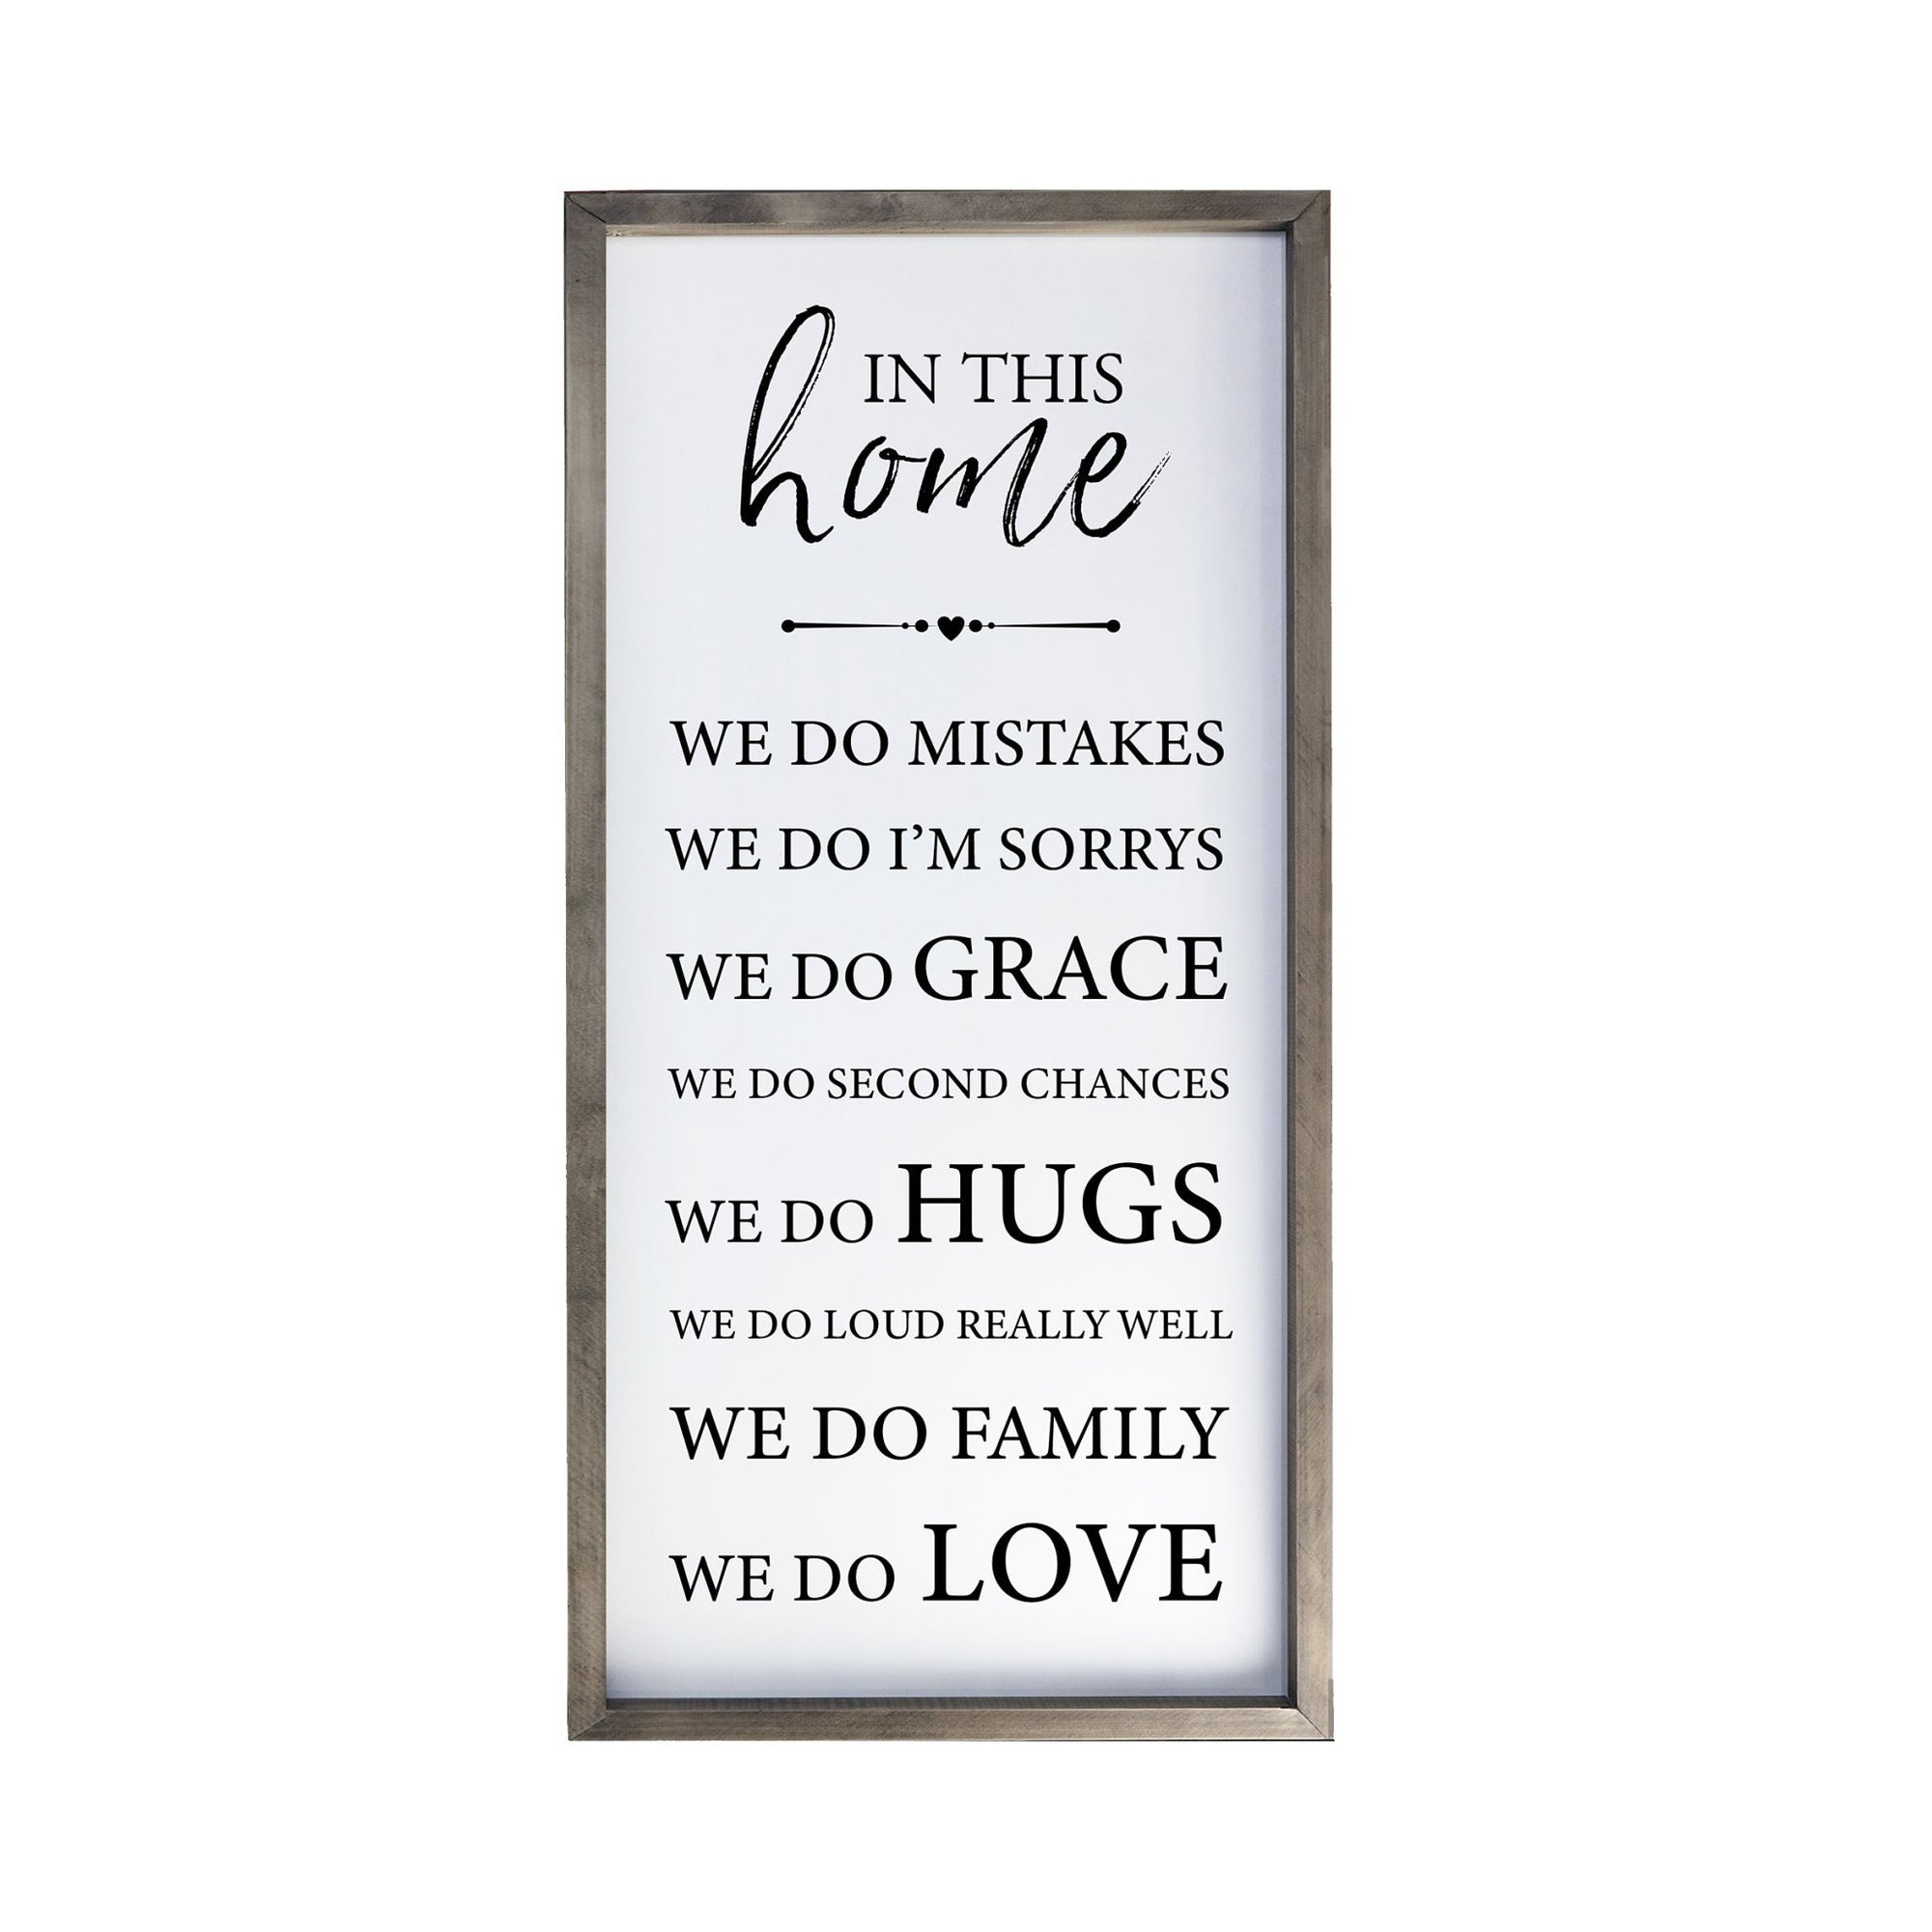 Large Family Wall Decor Quote Sign For Home 18 x 36 - In This Home We Do - LifeSong Milestones